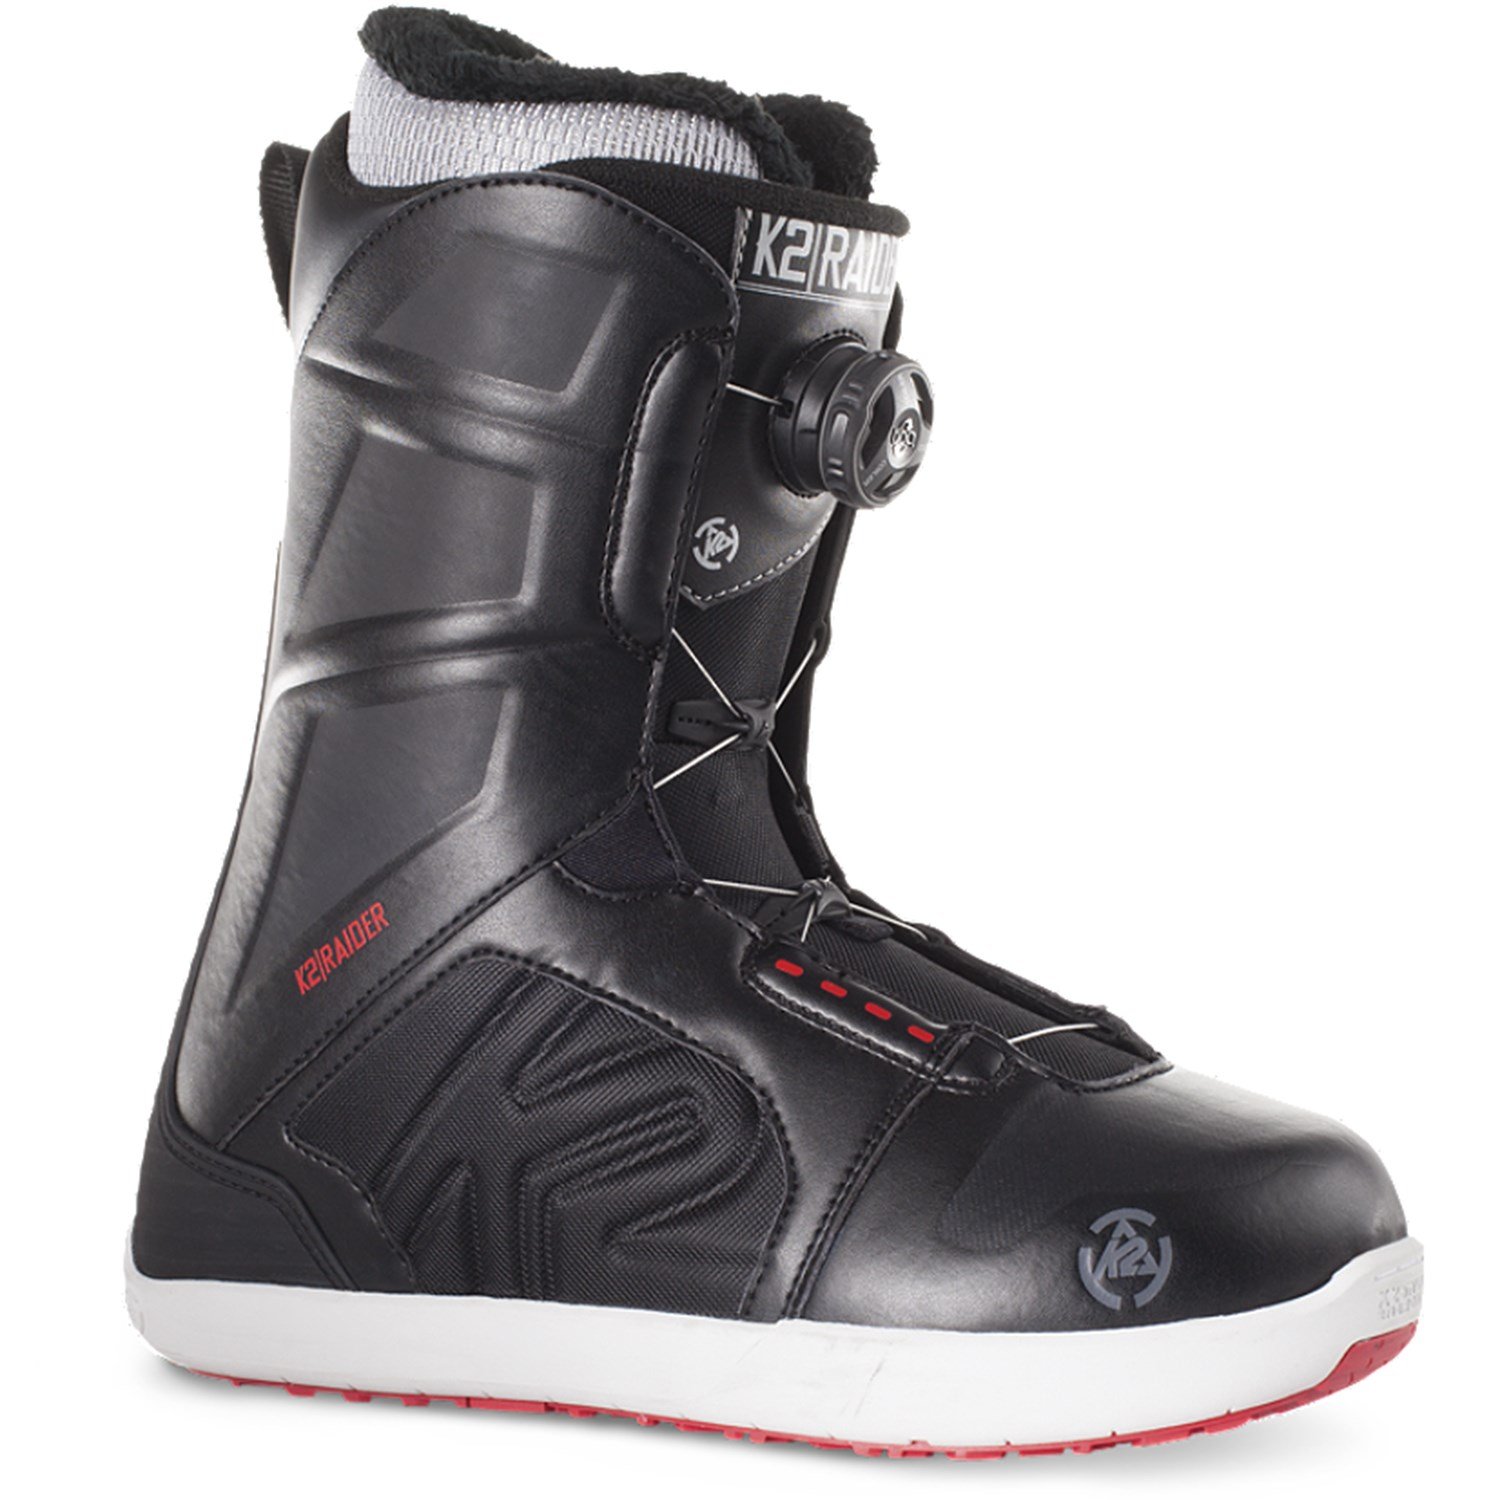 K2 Raider Snowboard Boots 2015 Evo intended for How To Loosen Snowboard Boots